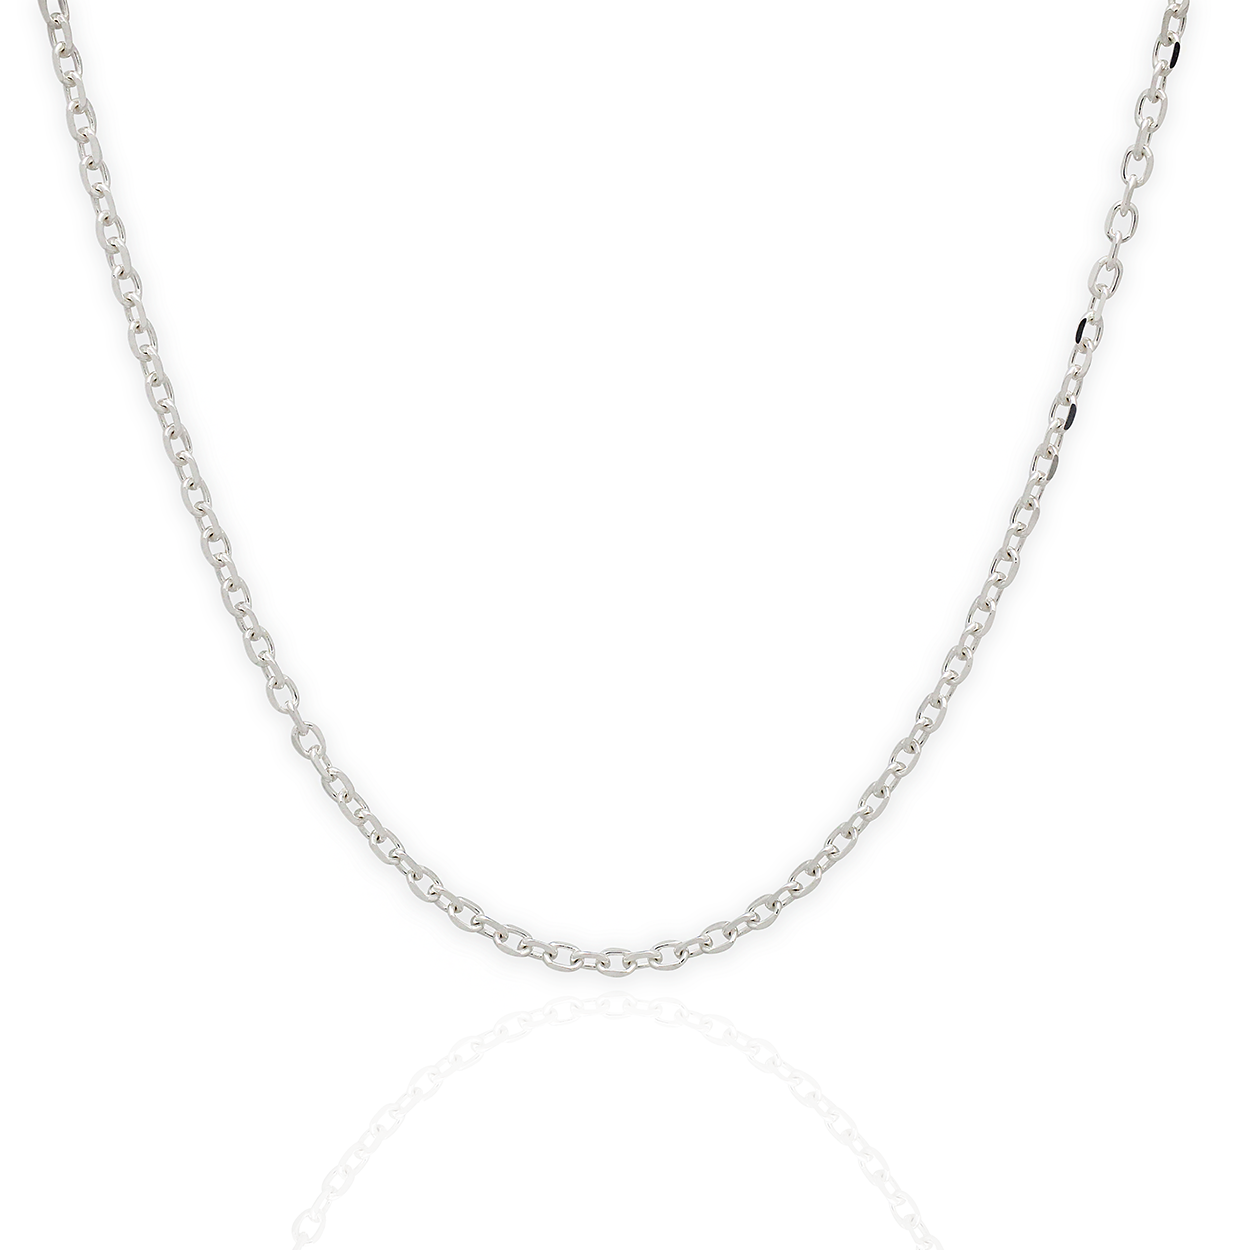 2mm Sterling Silver Paper Clip Style Chain